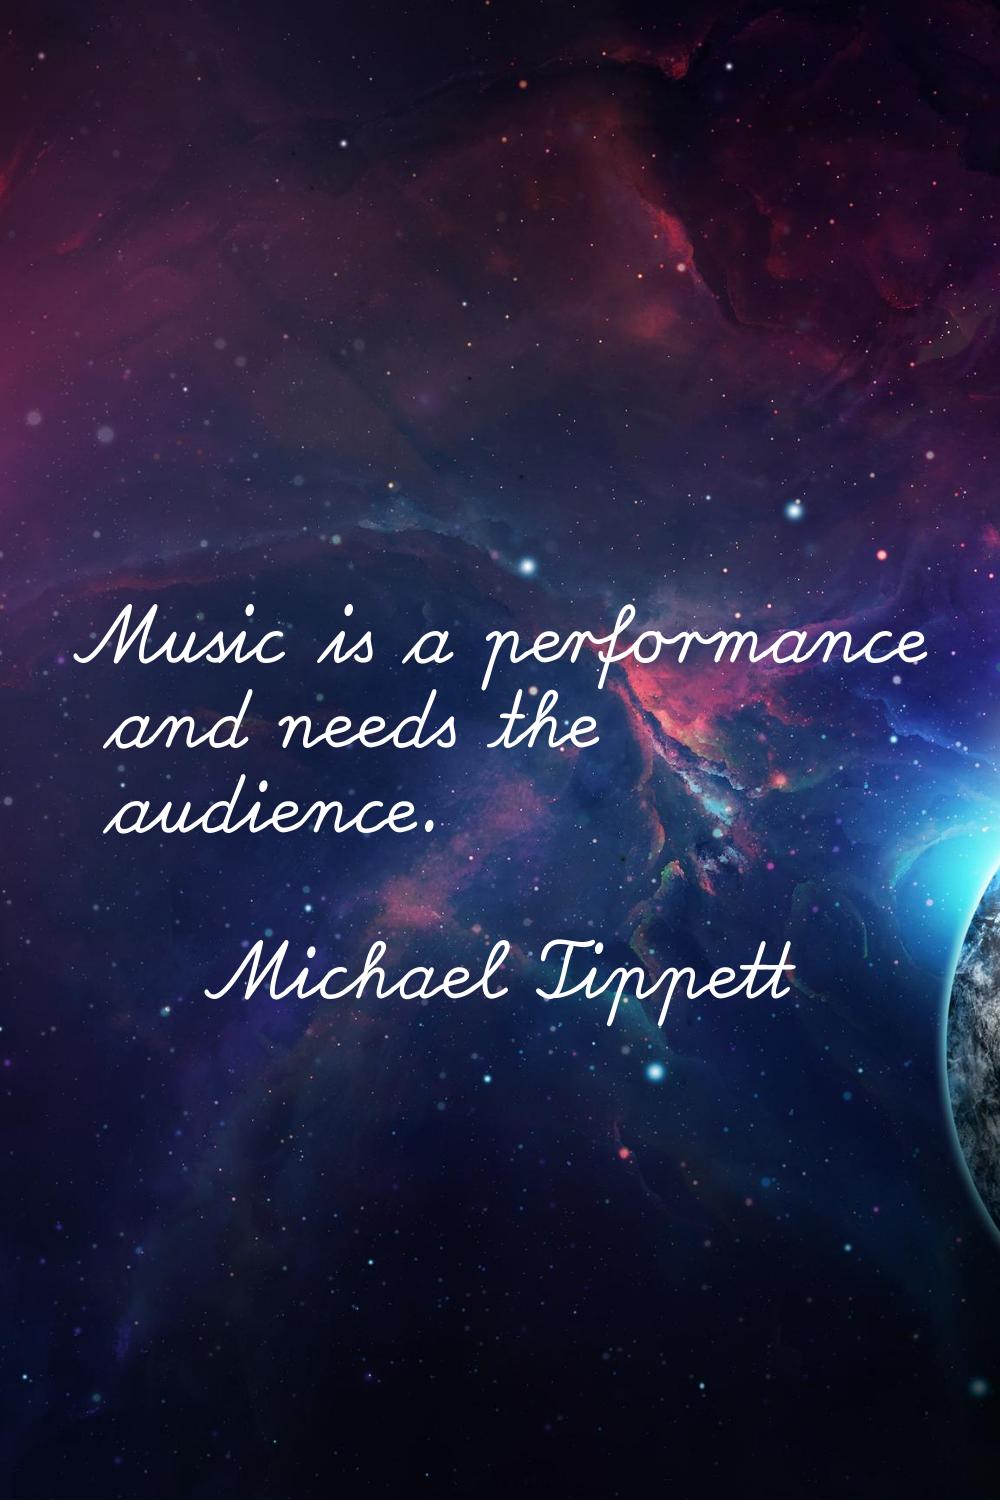 Music is a performance and needs the audience.